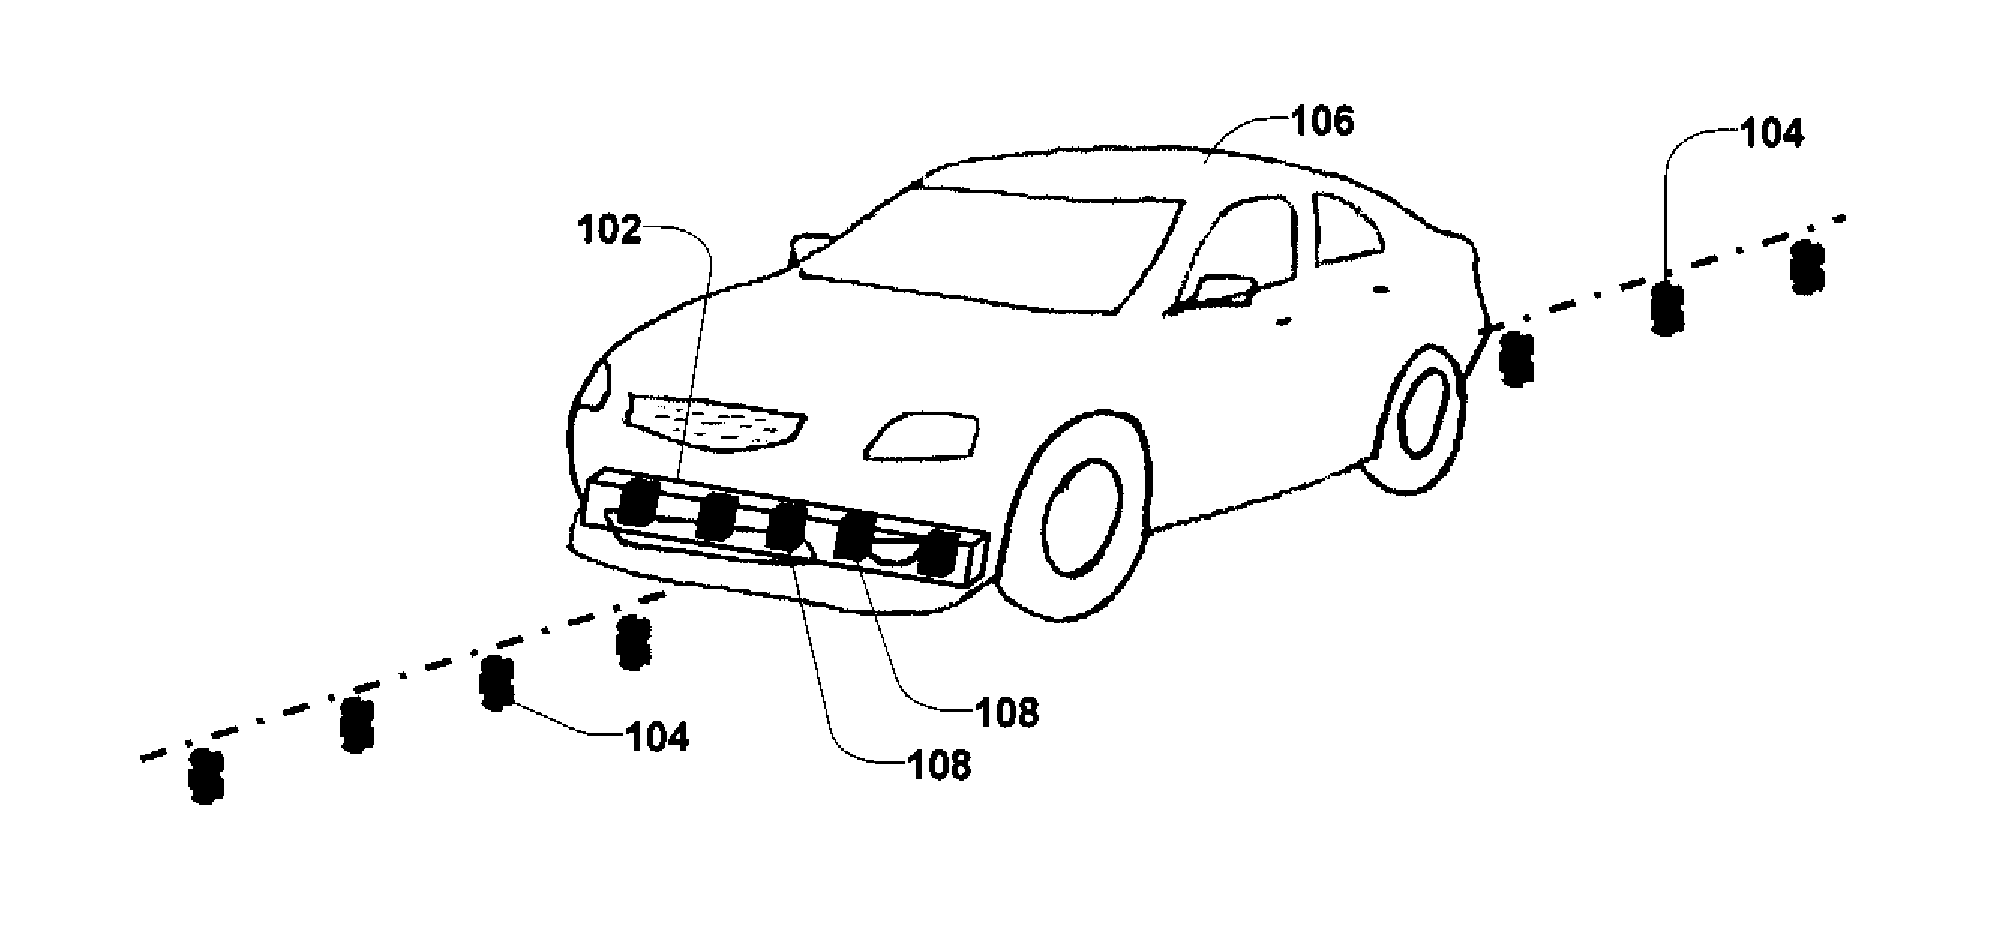 Position sensing system for intelligent vehicle guidance